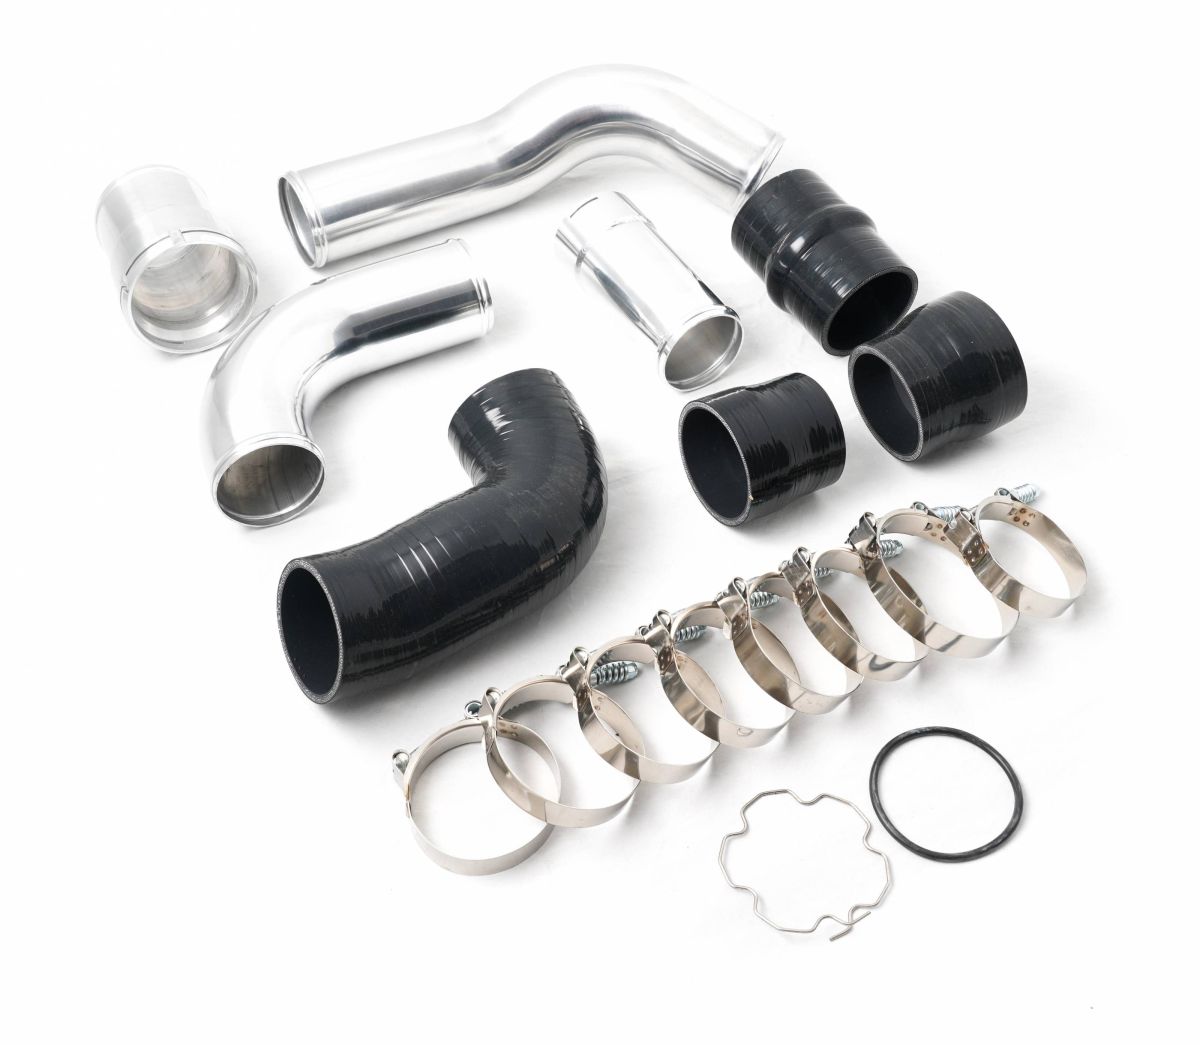 Rudy's Performance Parts - Rudy's Polished Aluminum Hot & Cold Side Intercooler Pipe & Boot Upgrade Kit For 11-16 6.7 Powerstroke